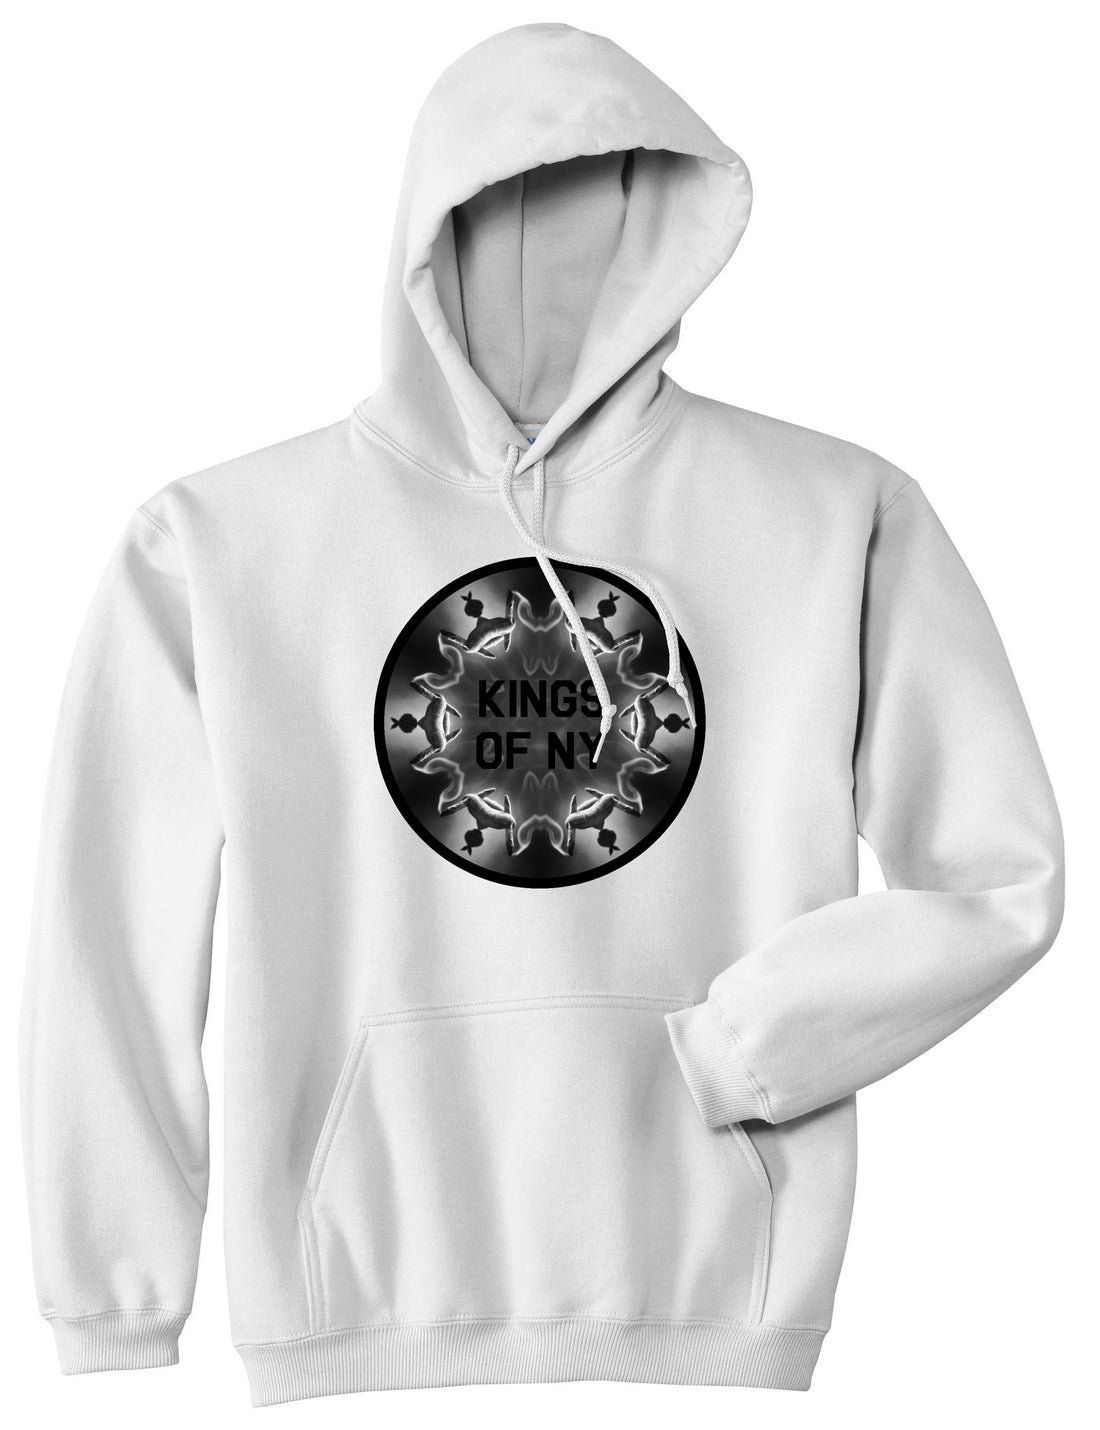 Pass That Blunt Pullover Hoodie in White By Kings Of NY